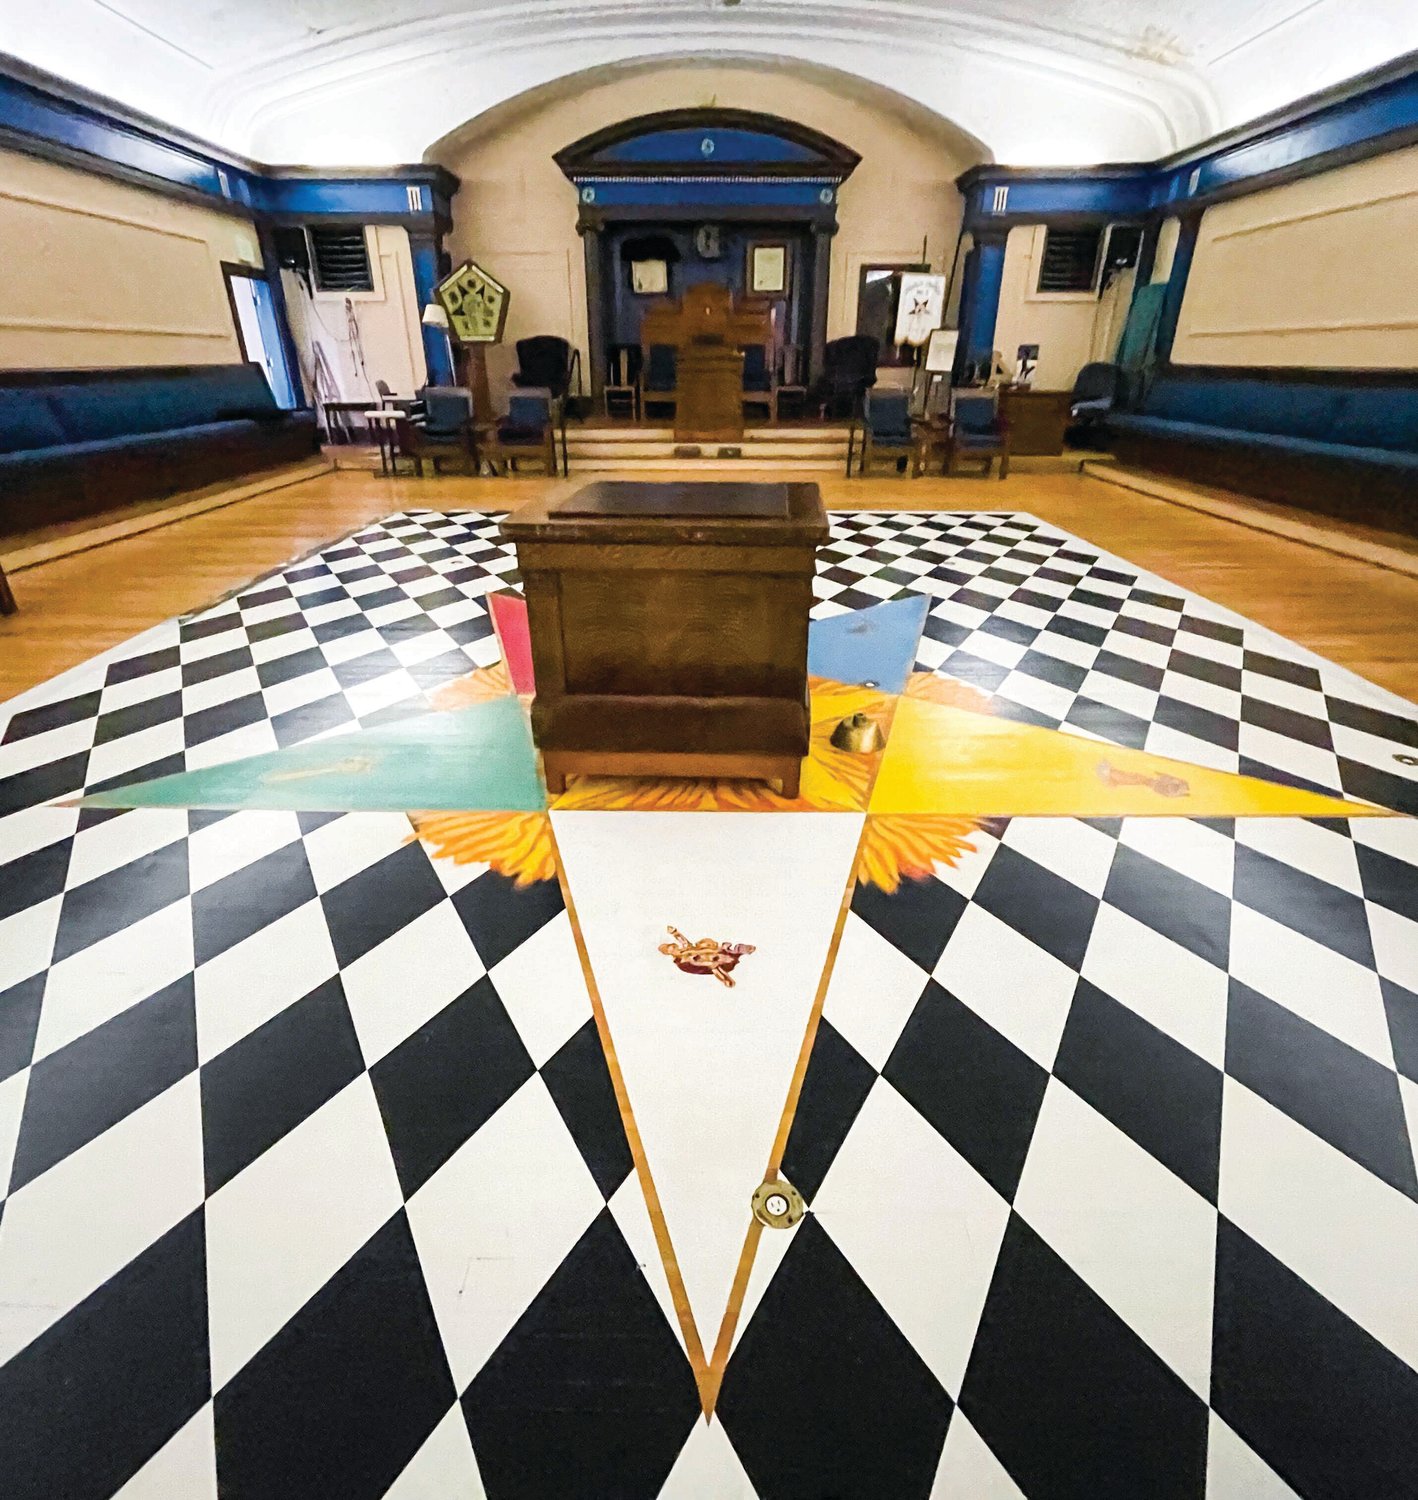 A star and checkered flooring decorate the top floor of the Masonic Temple in Centralia.